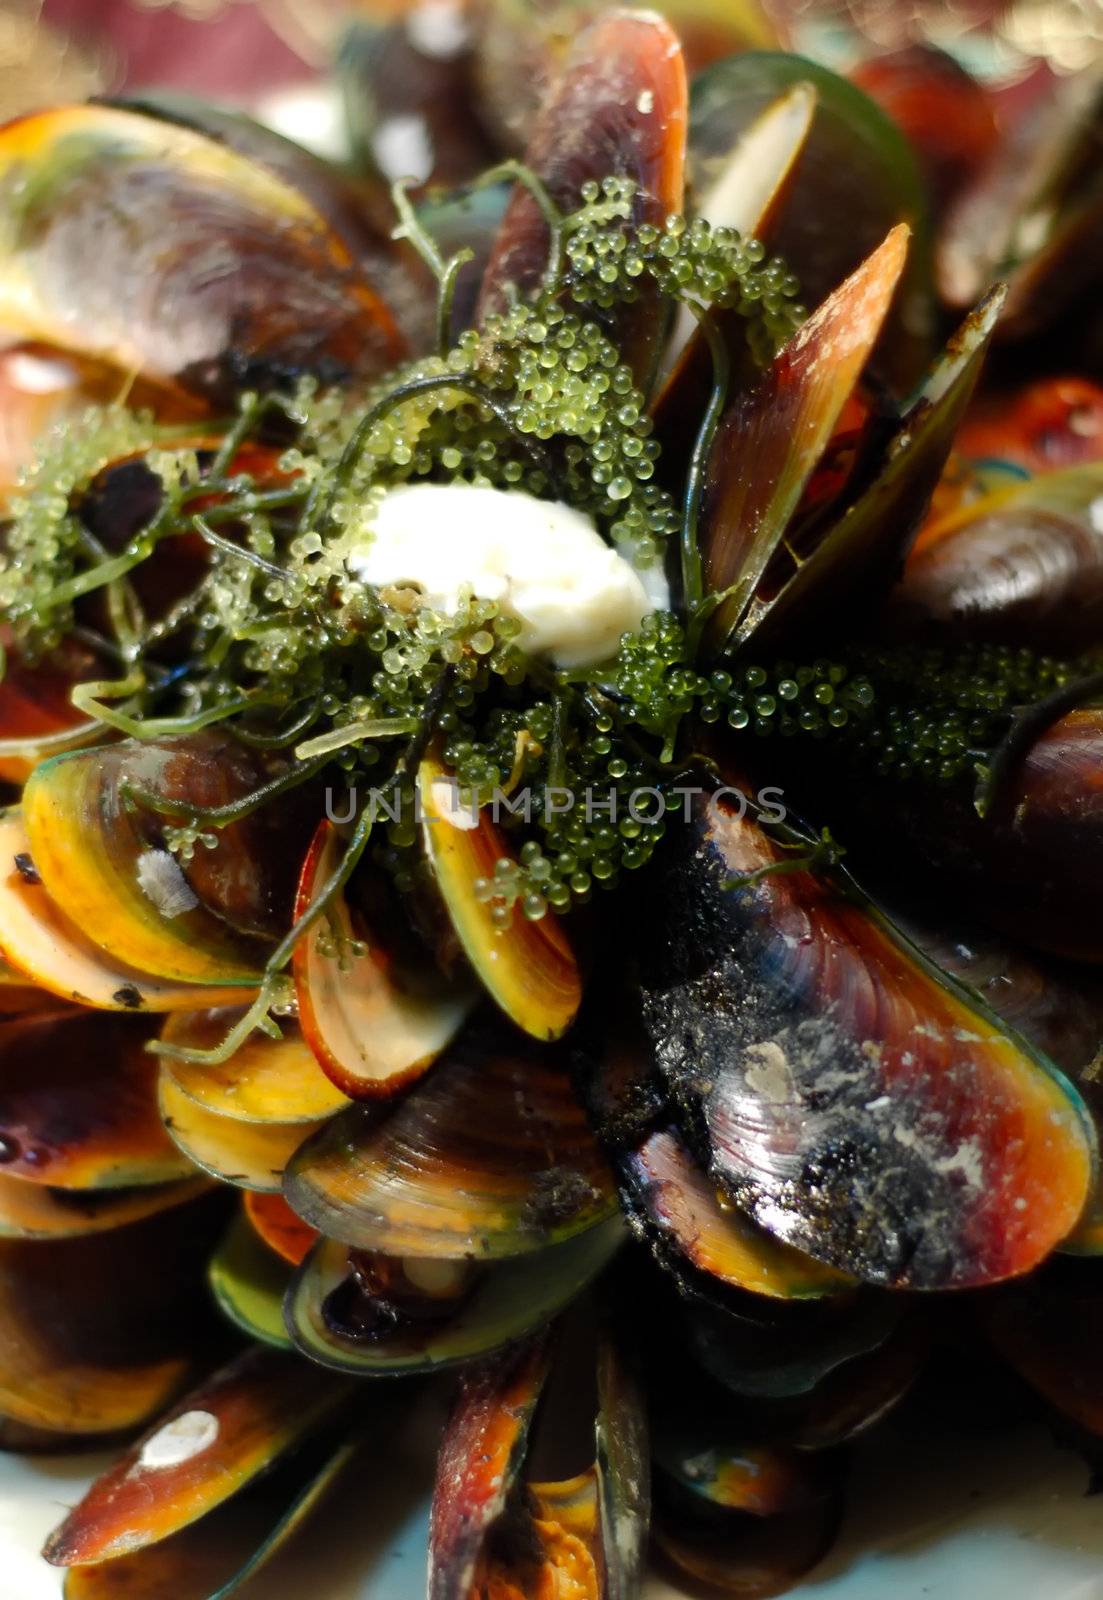 Baked Mussels topped with sea weeds and mayonaisse